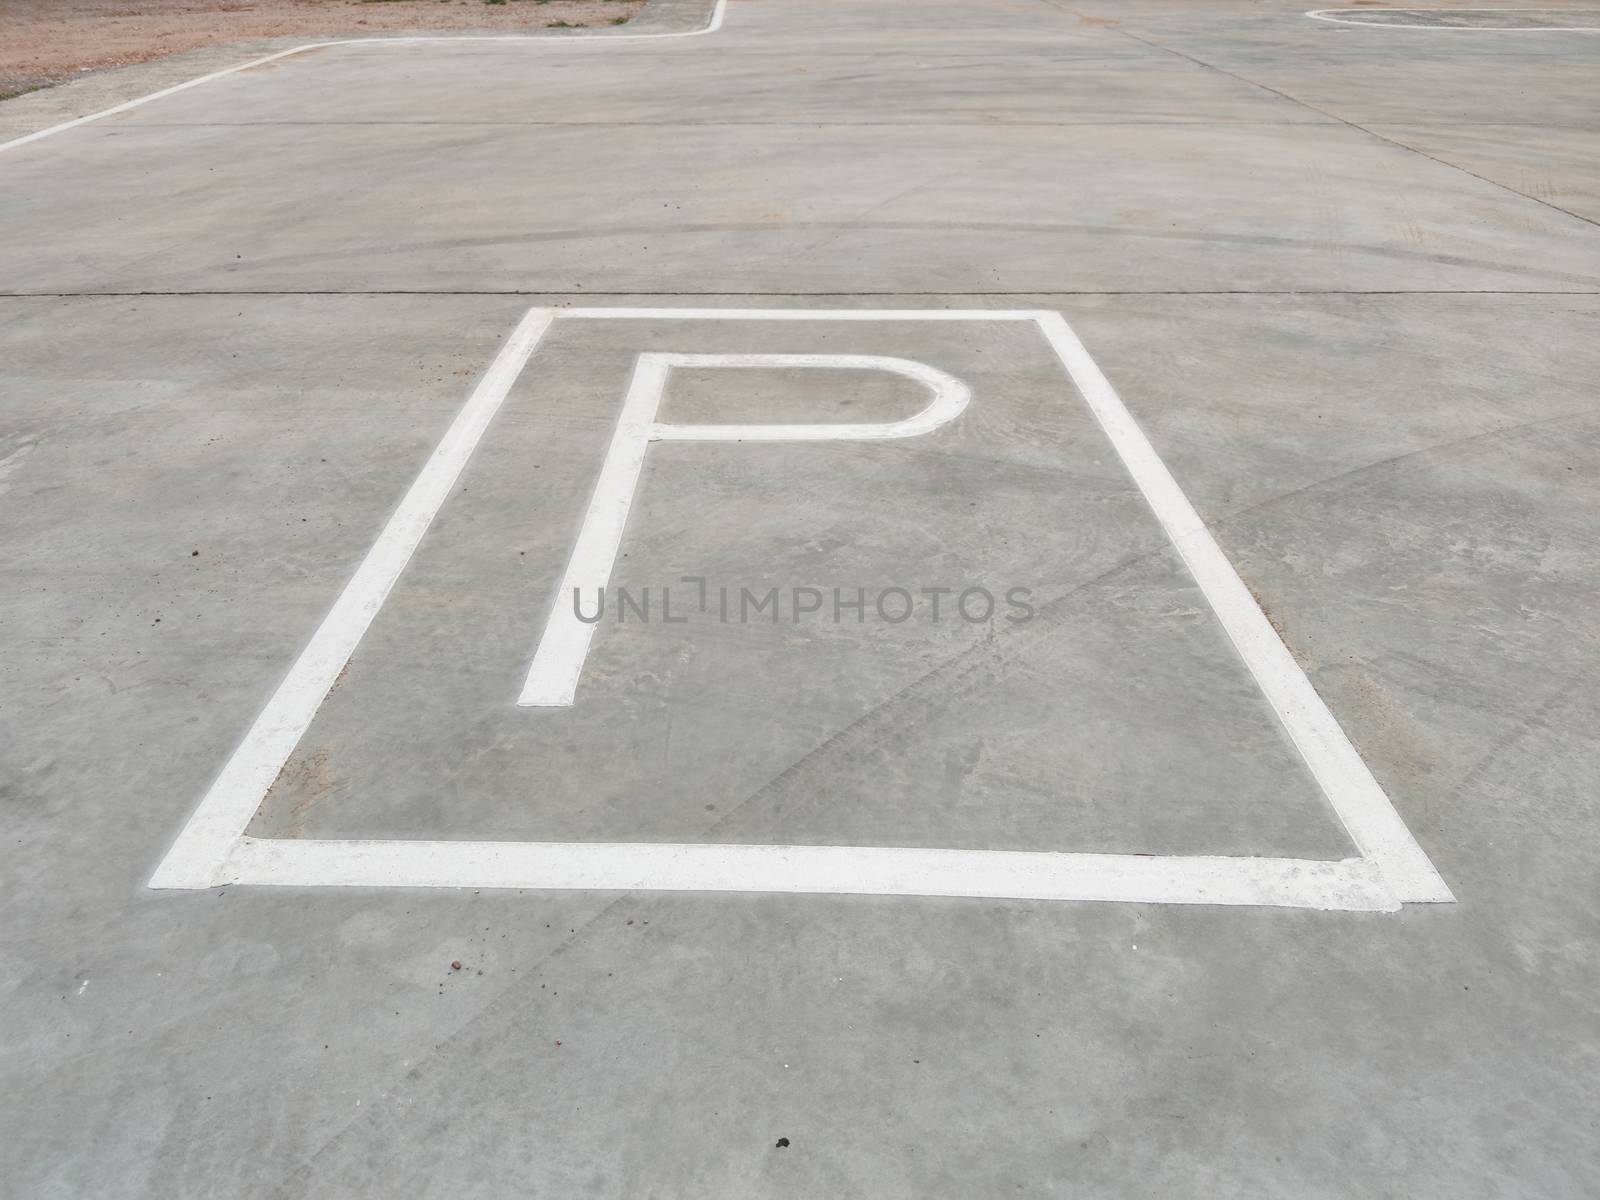 White parking sign on the ground without any arrow for directions in Thailand